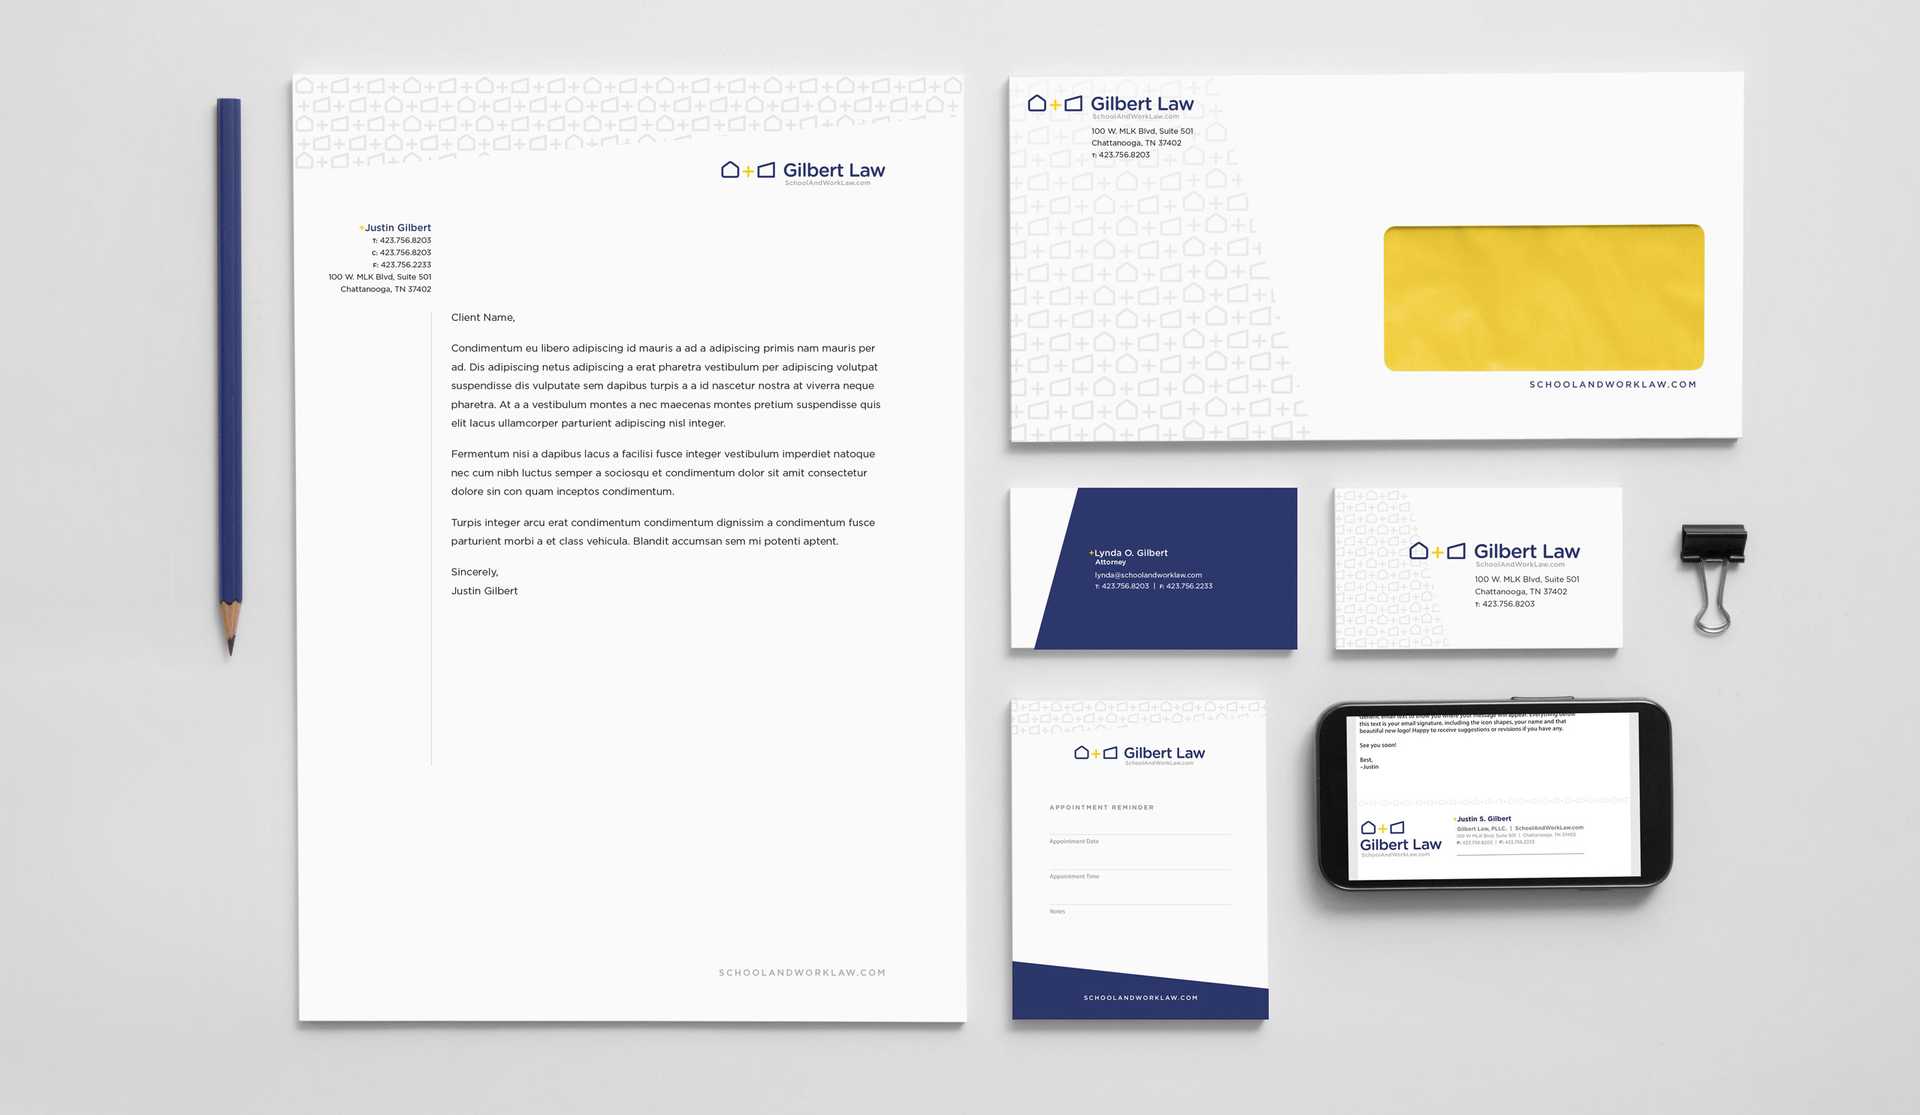 Gilbert Law Collateral